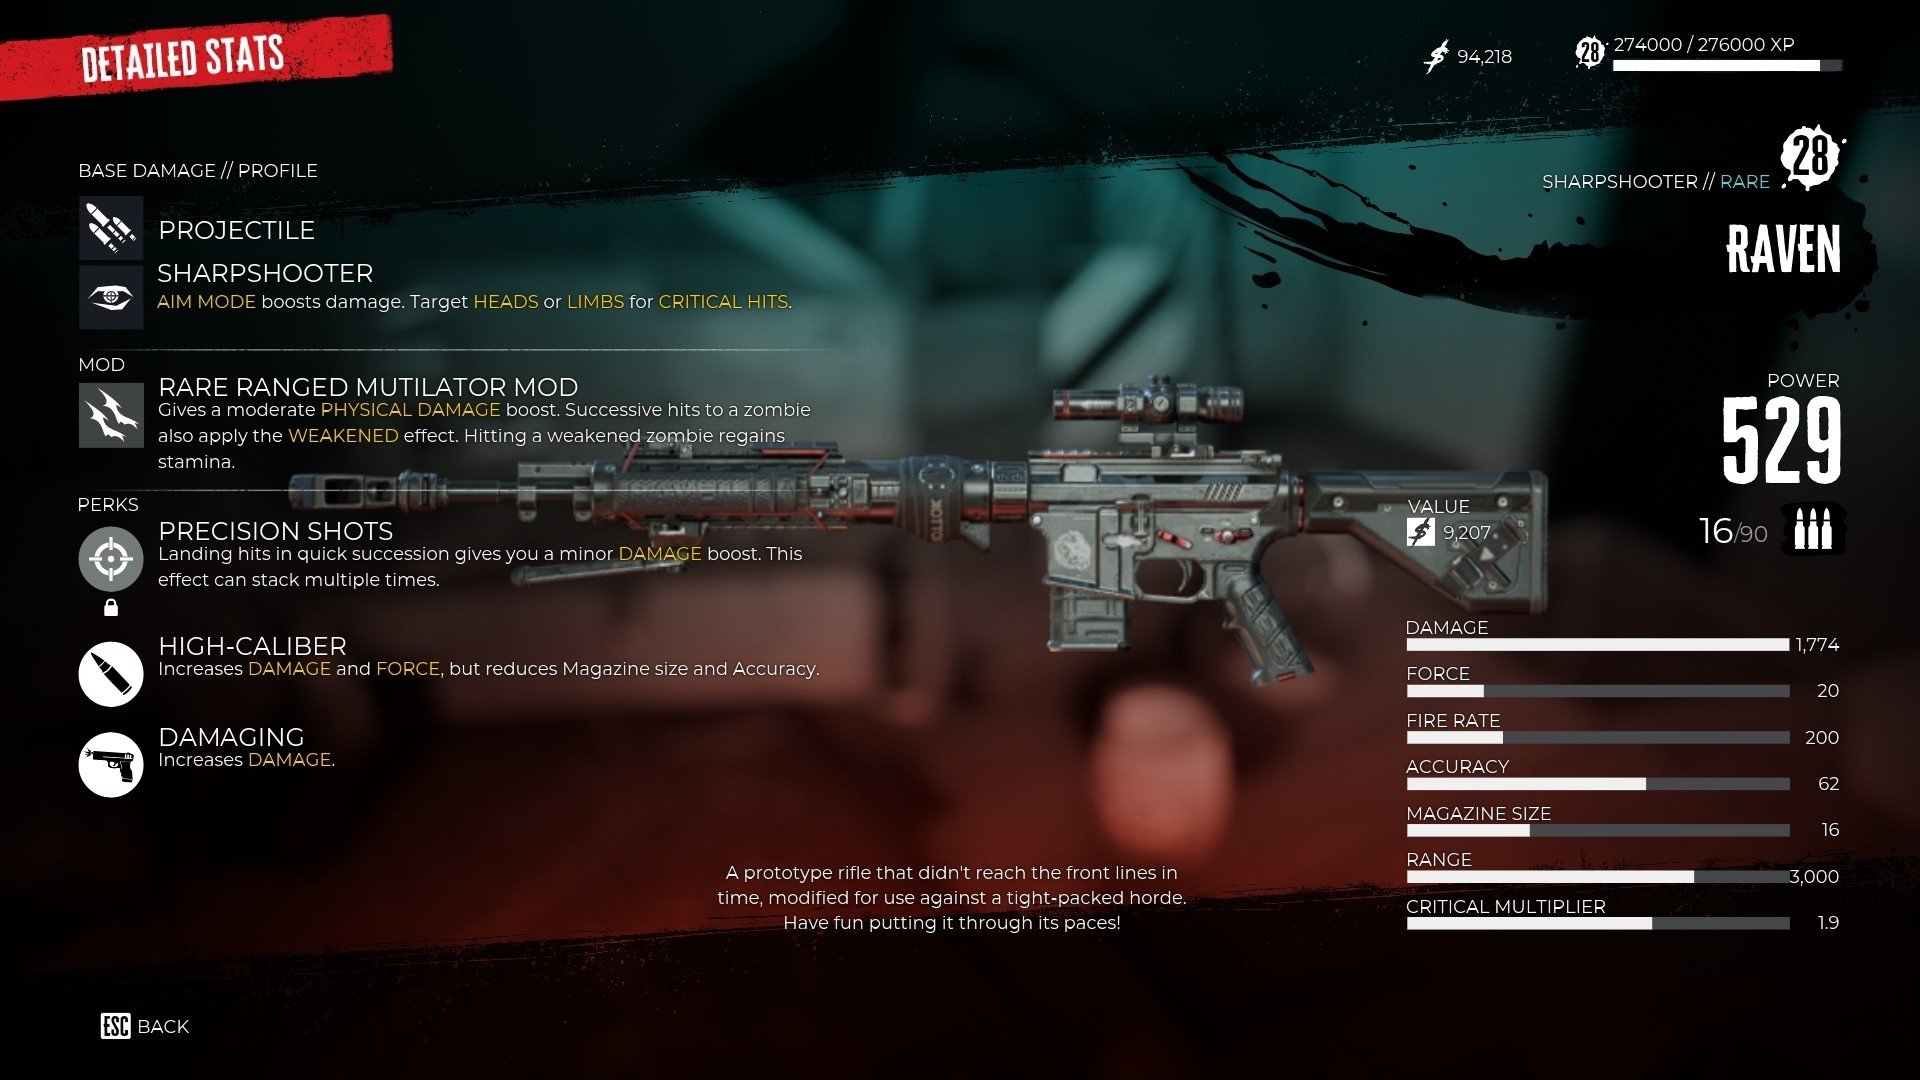 Dead Island 2 menu screenshot showing a modern military rifle with crude modifications int eh centre surrounded by boxes containing detailed statistical information about the weapon. 